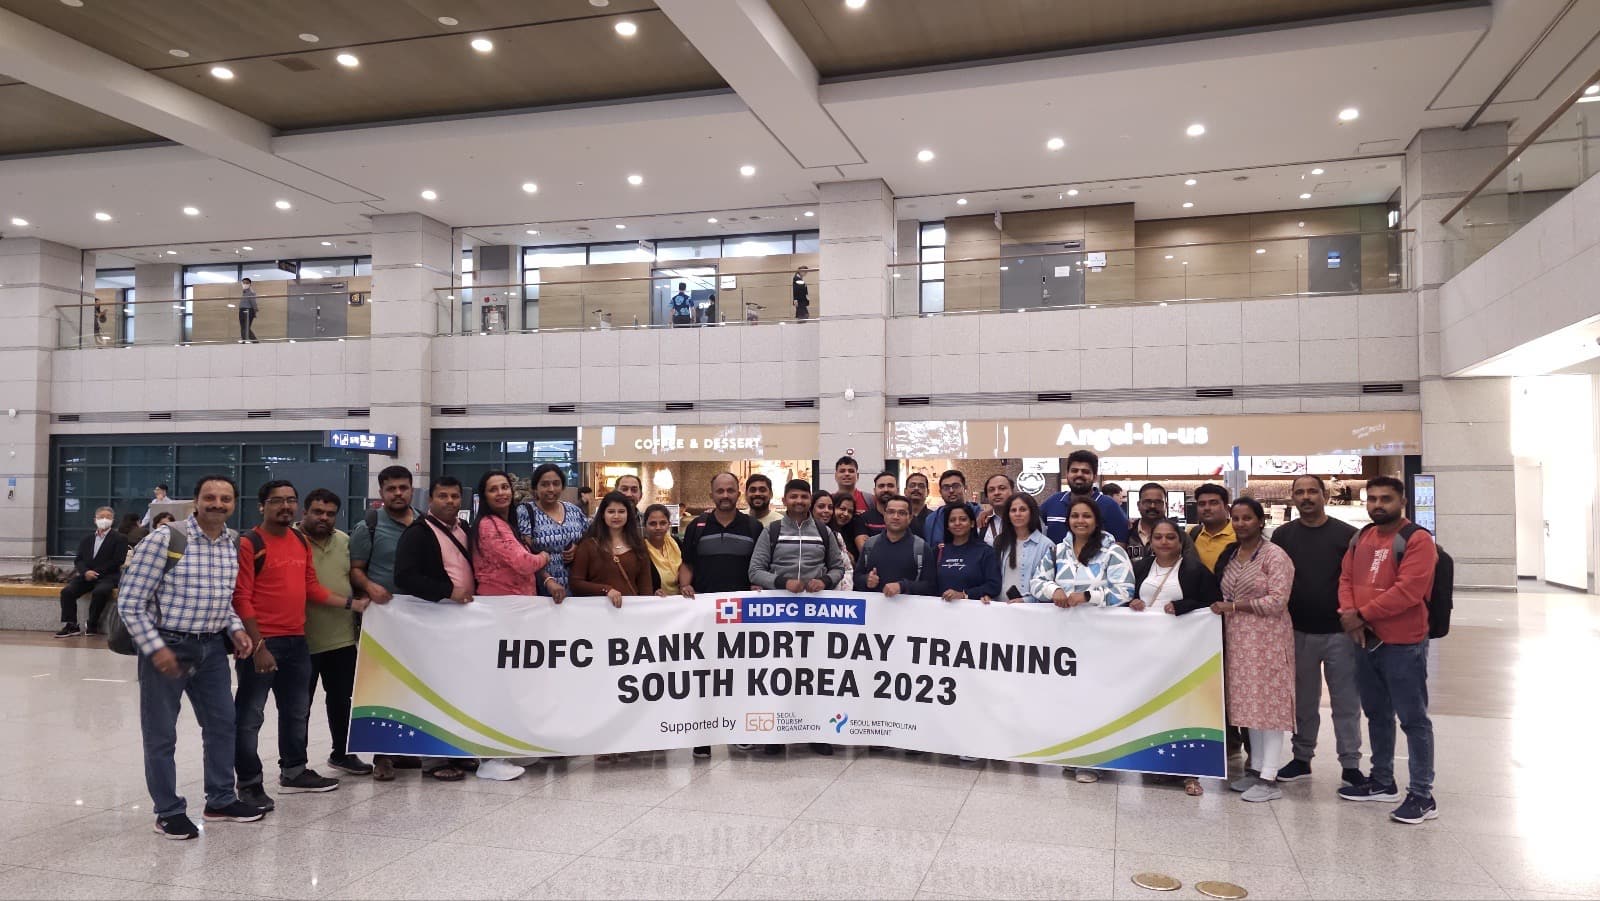 [SCB NEWS] 3,257 Financial Experts from India's HDFC Bank Enjoyed the Autumn Season in Seoul 